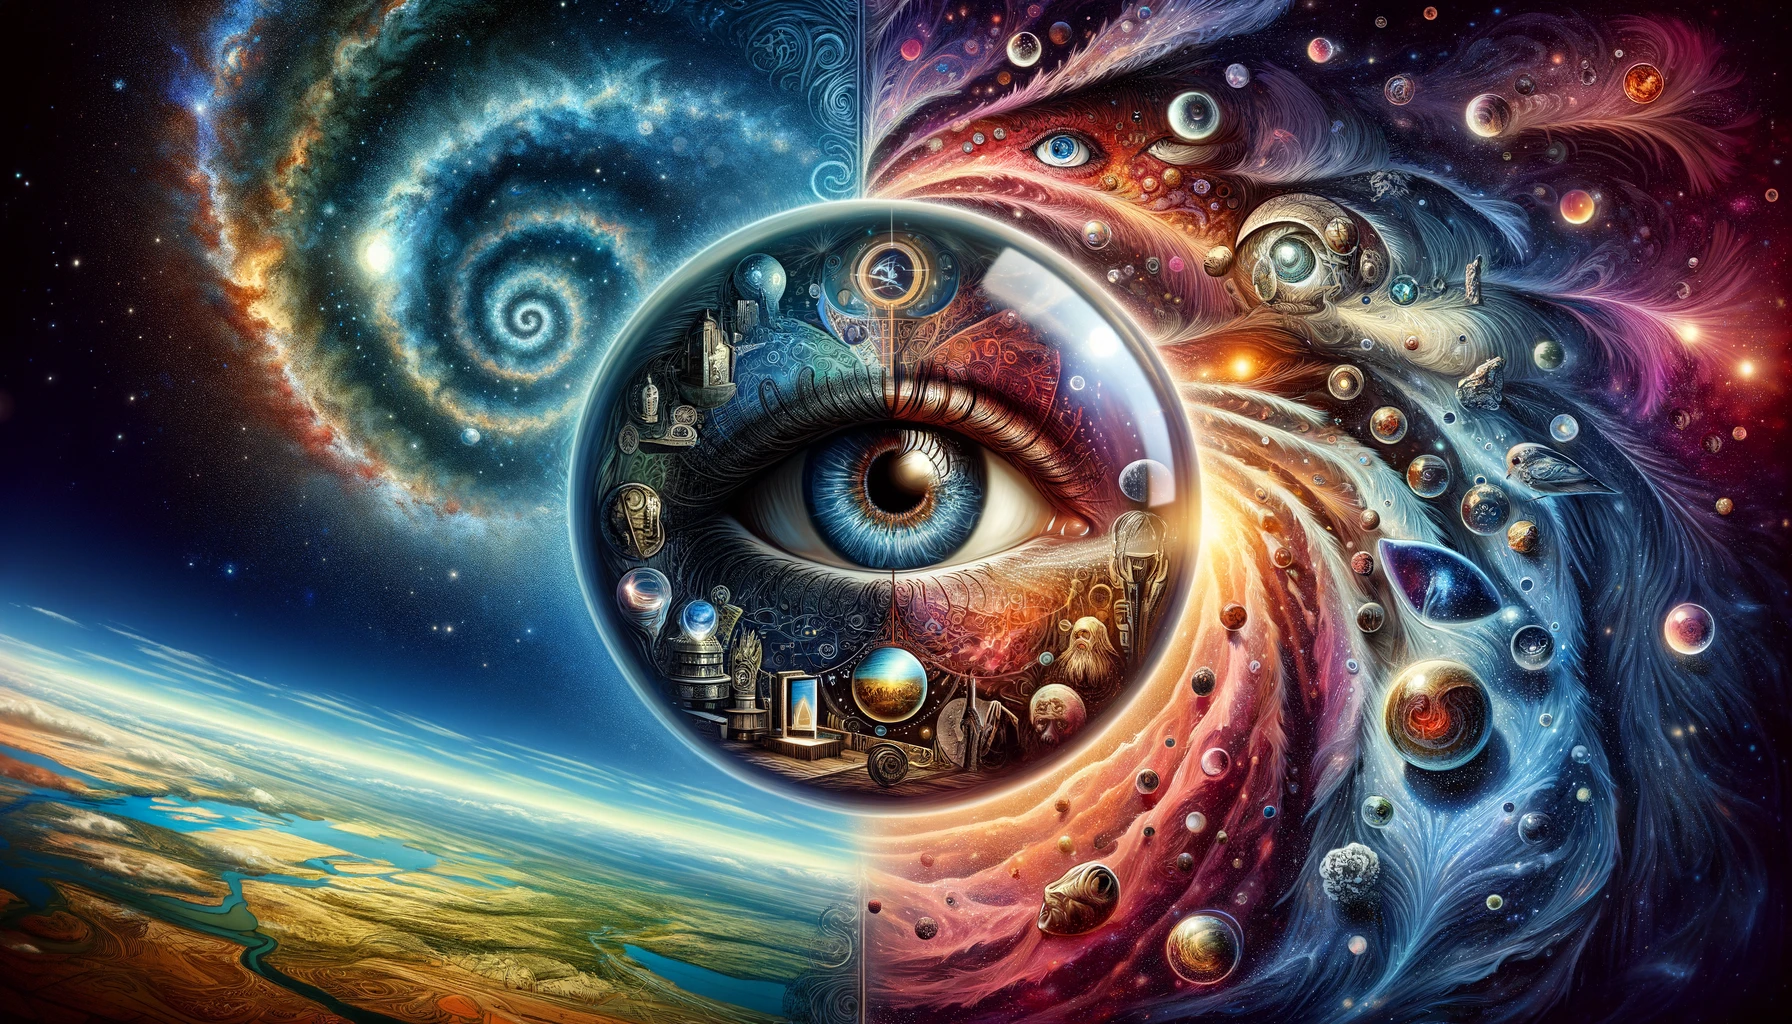 ·E 2024 03 07 01.15.20   A vibrant and captivating featured image for an article about clairvoyance vs precognition. The artwork combines elements of both psychic phenomena in.webp